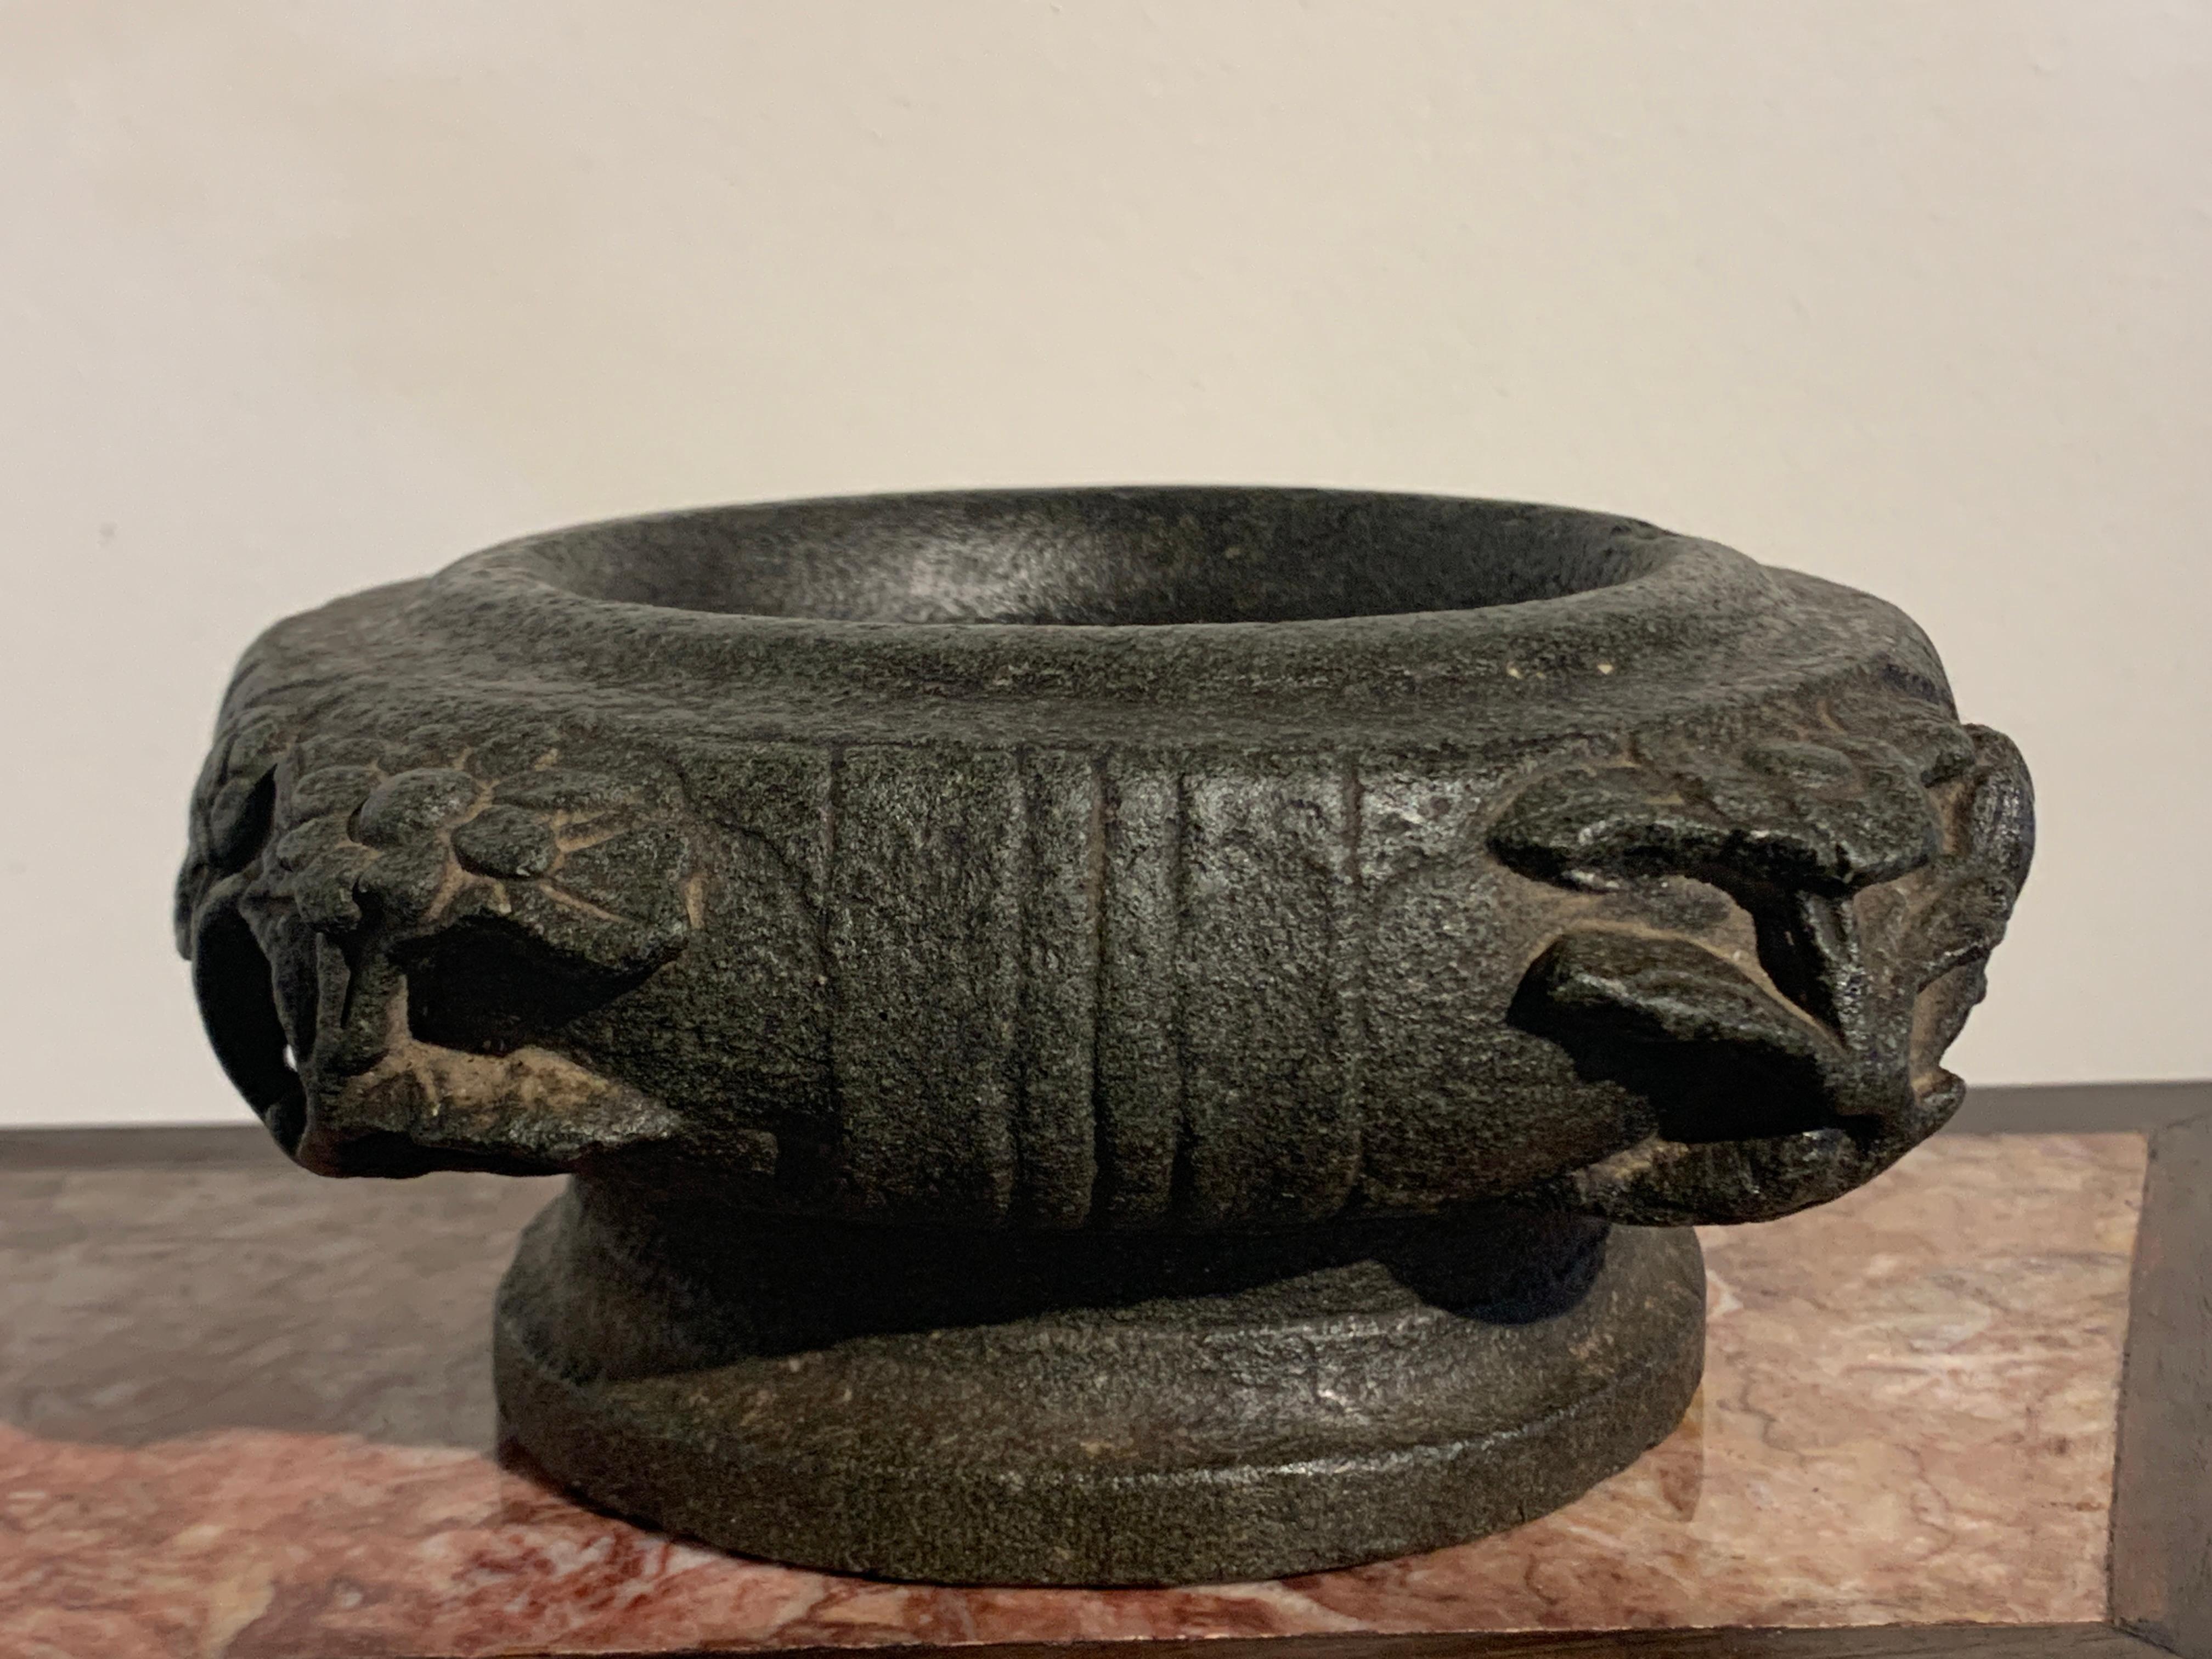 An unusual carved stone jardinière, or possibly a mortar, 19th century or earlier, Asia, possibly China.

The jardinière of shallow bowl form, with wide, thick walls, and set upon a flat, pedestal foot. Carved from a single block of dark